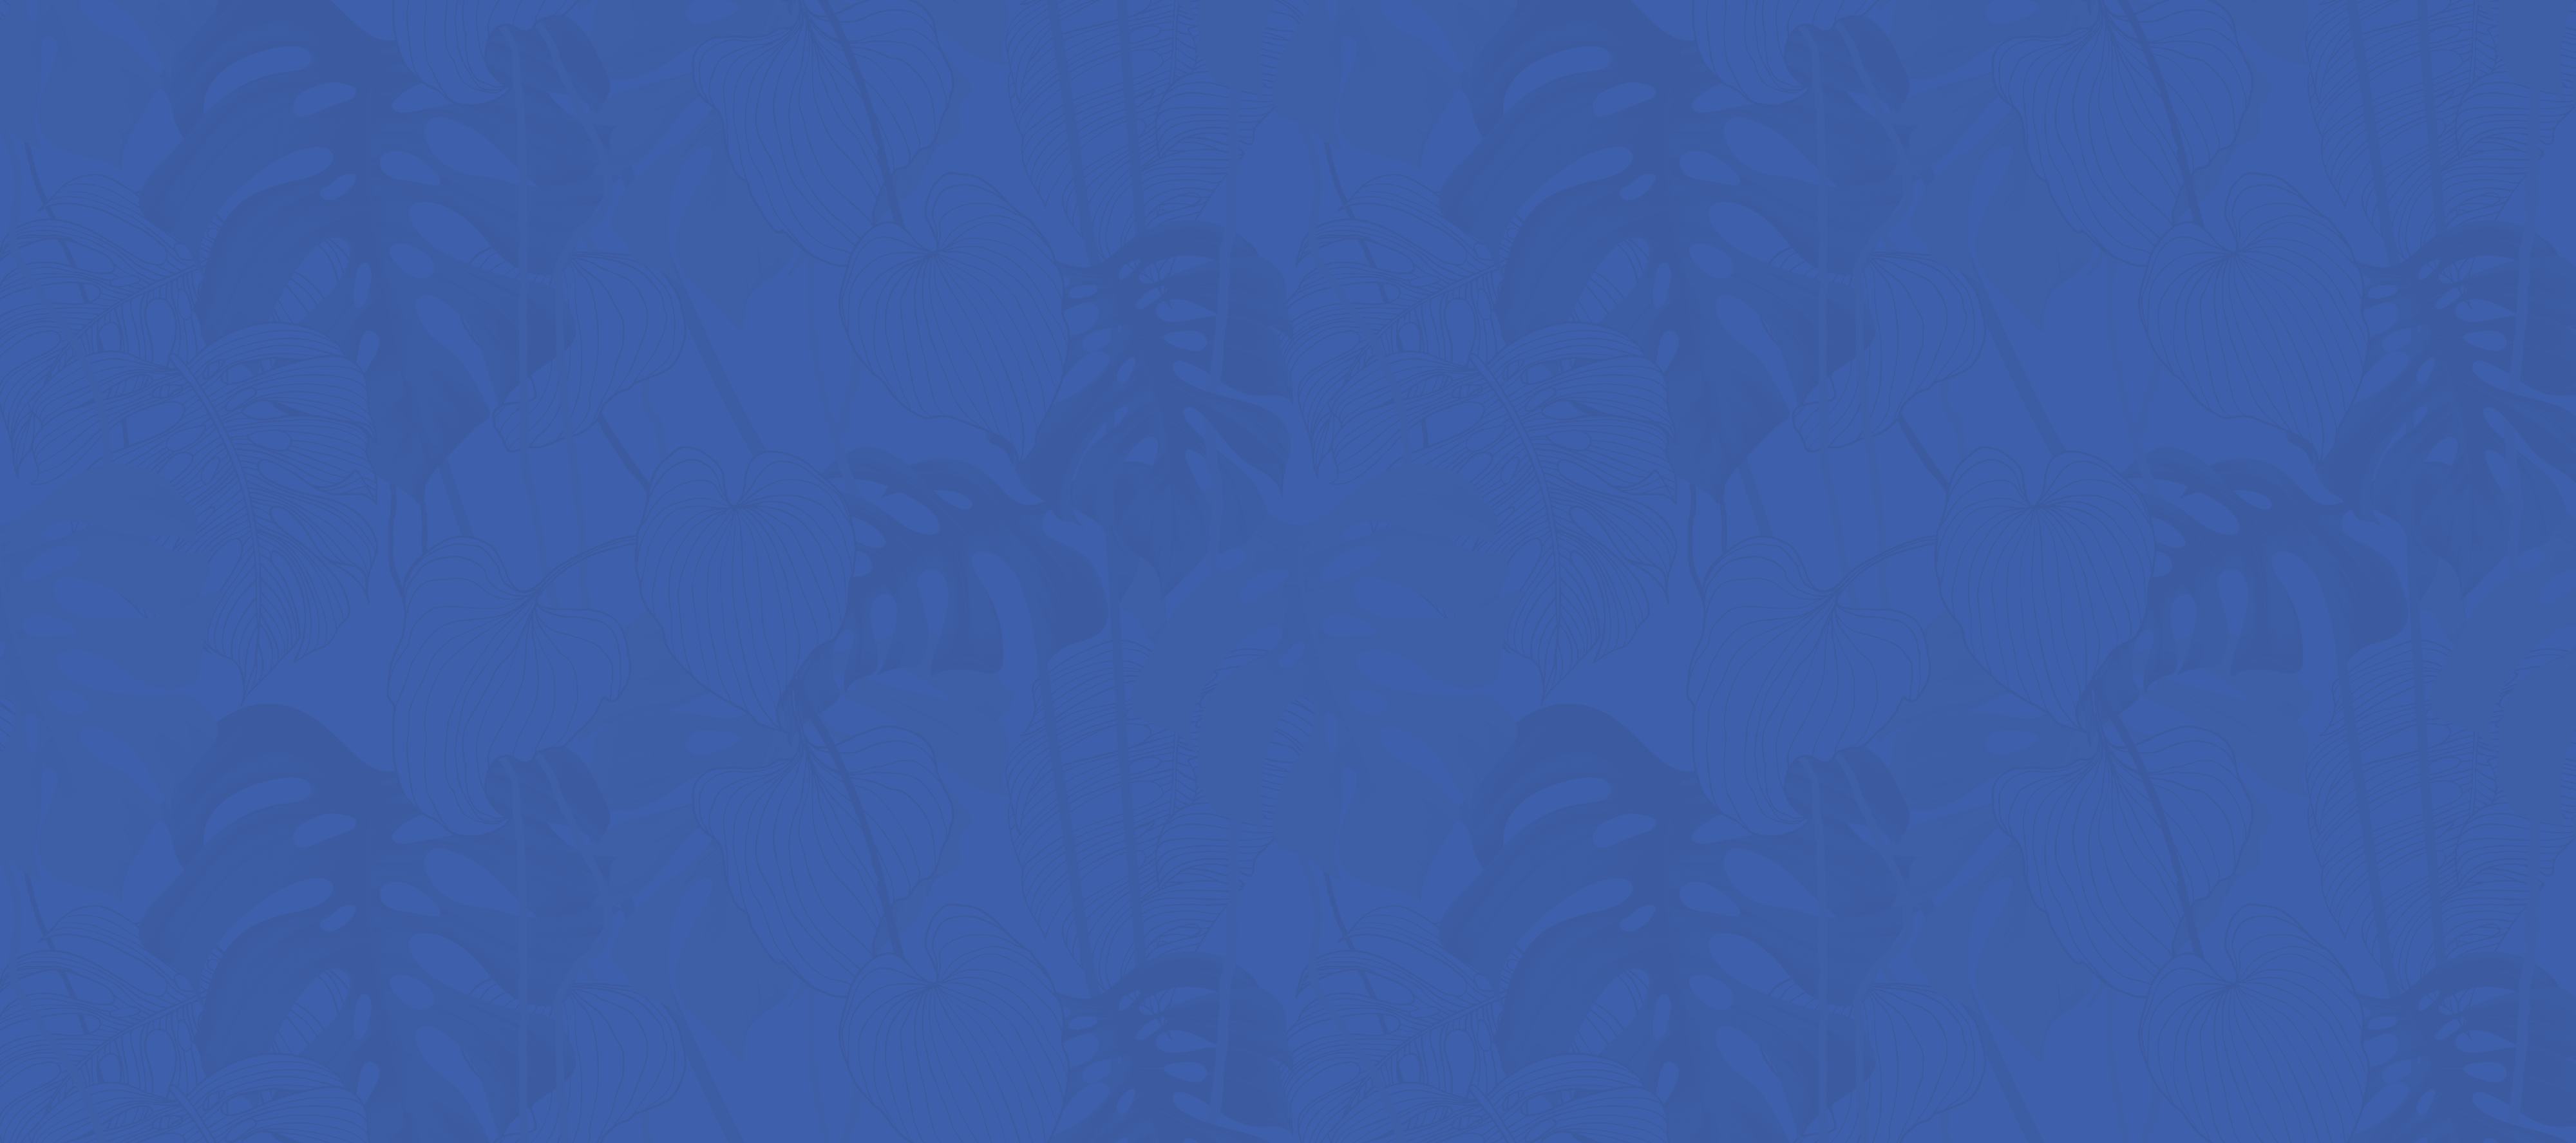 Faded floral pattern over blue background (IMAGE)